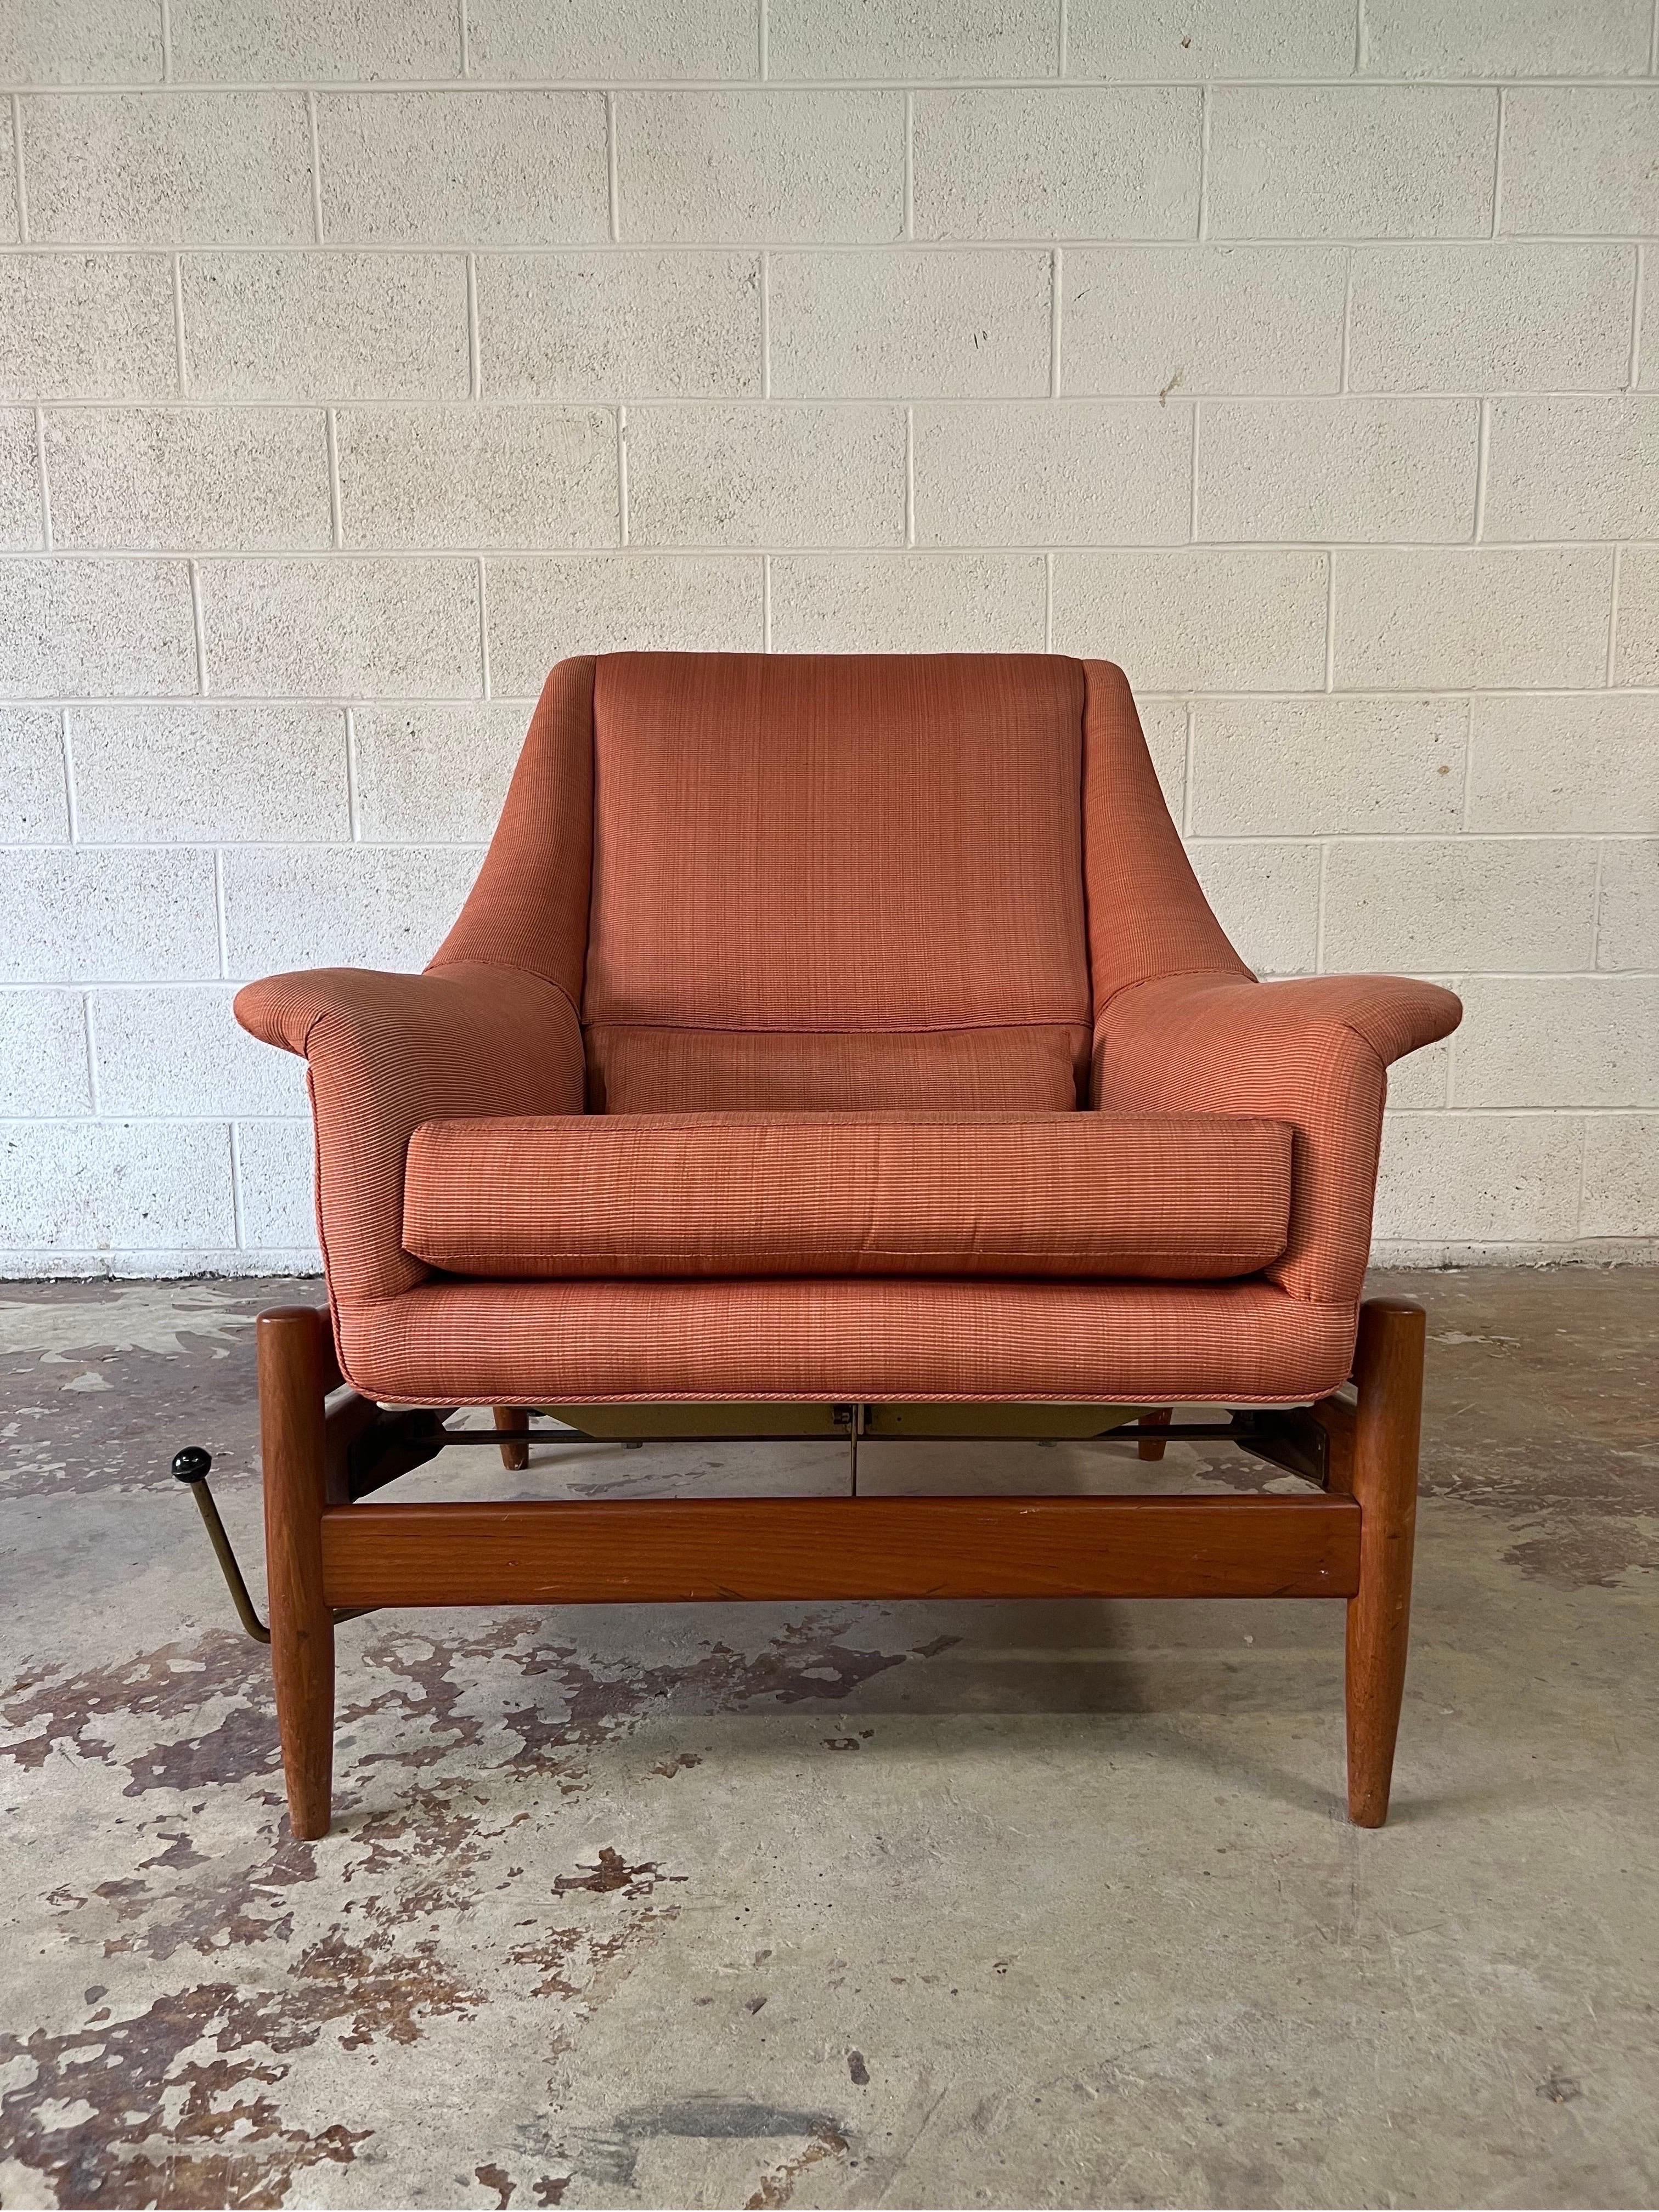 Mid-Century Modern Recliner by L.K. Hjelle, Norway circa 1960’s